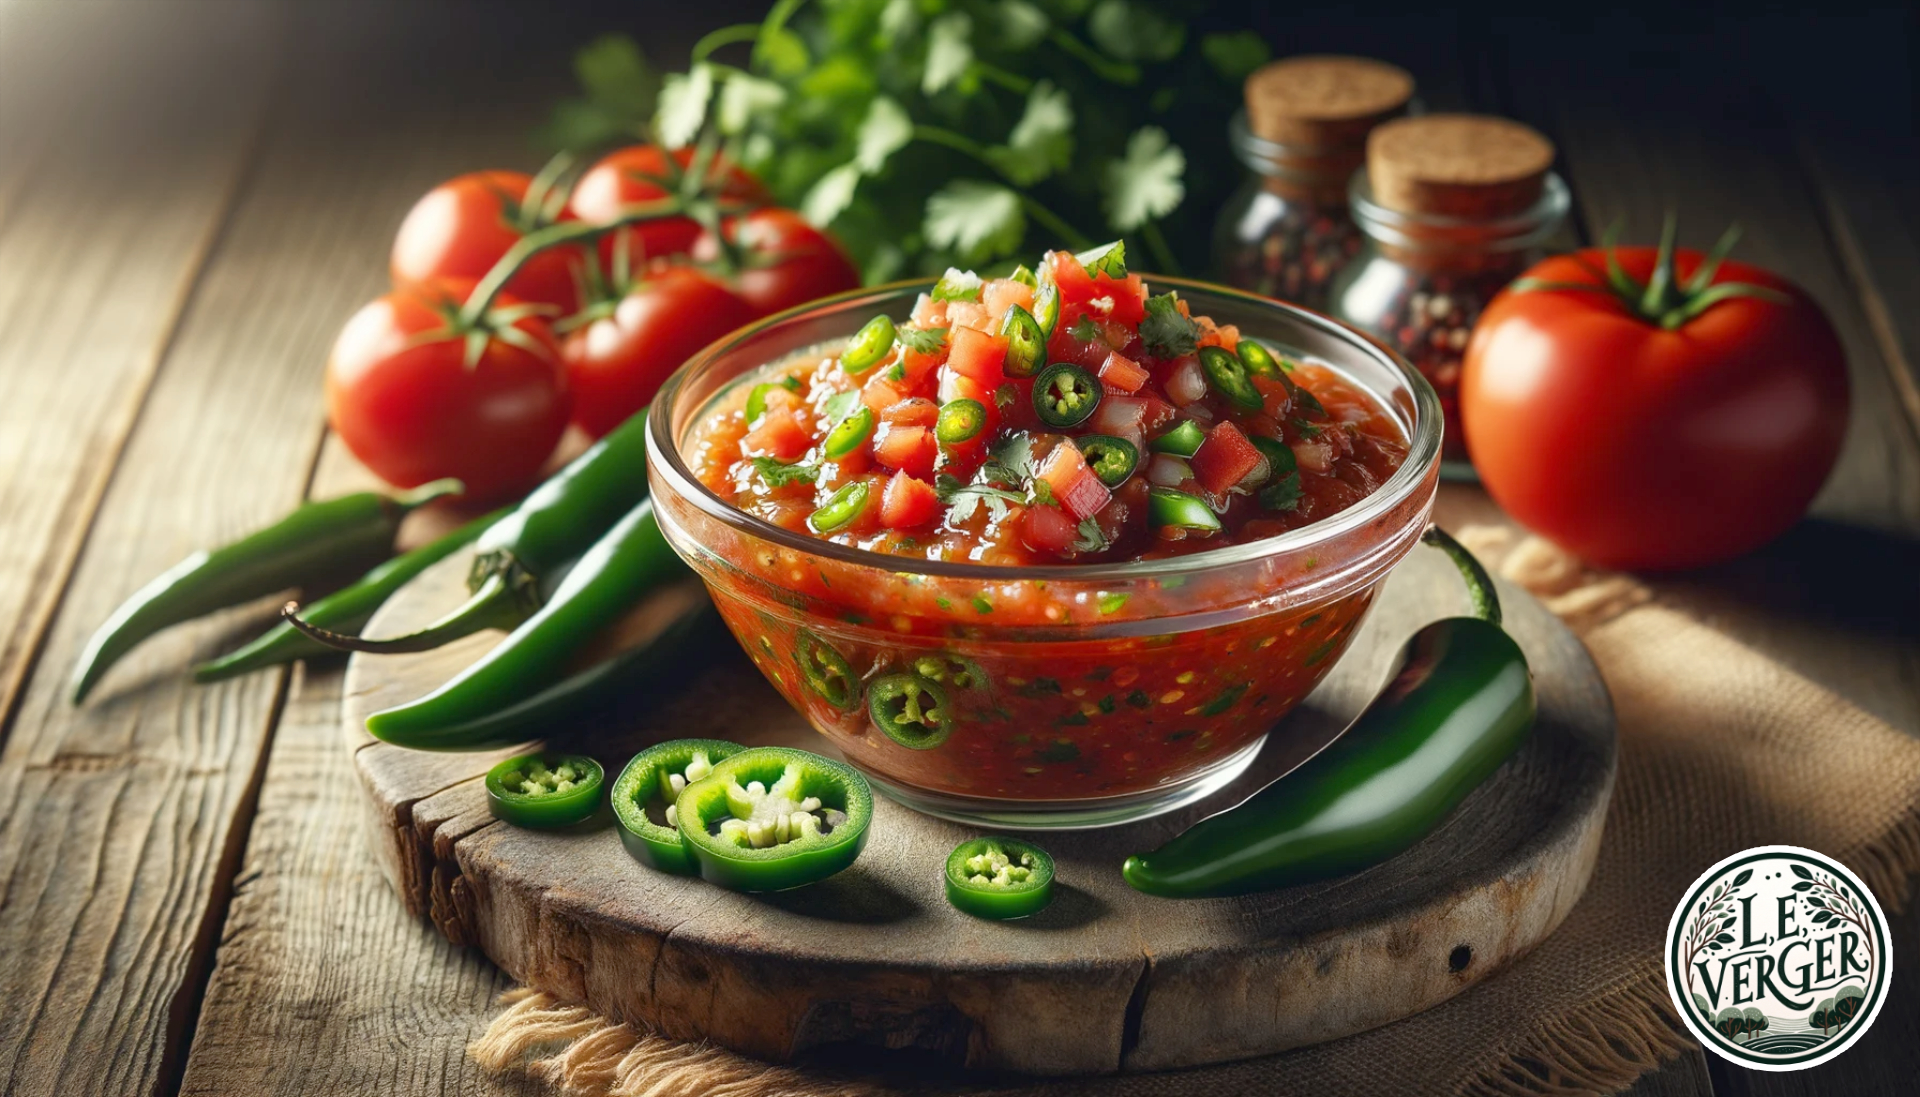 Photo of Serrano Salsa presented in a luxurious culinary style typical of British marketing. The salsa sits in a clear glass bowl, showcasing its vibrant red colour with flecks of green serranos and fresh cilantro. Chunks of tomatoes and diced onions are evident in the mix. The bowl is placed on a rustic wooden board, with fresh serrano peppers, tomatoes, and a bunch of cilantro laid out around it. The scene is lit with soft, ambient lighting, highlighting the freshness and texture of the salsa.